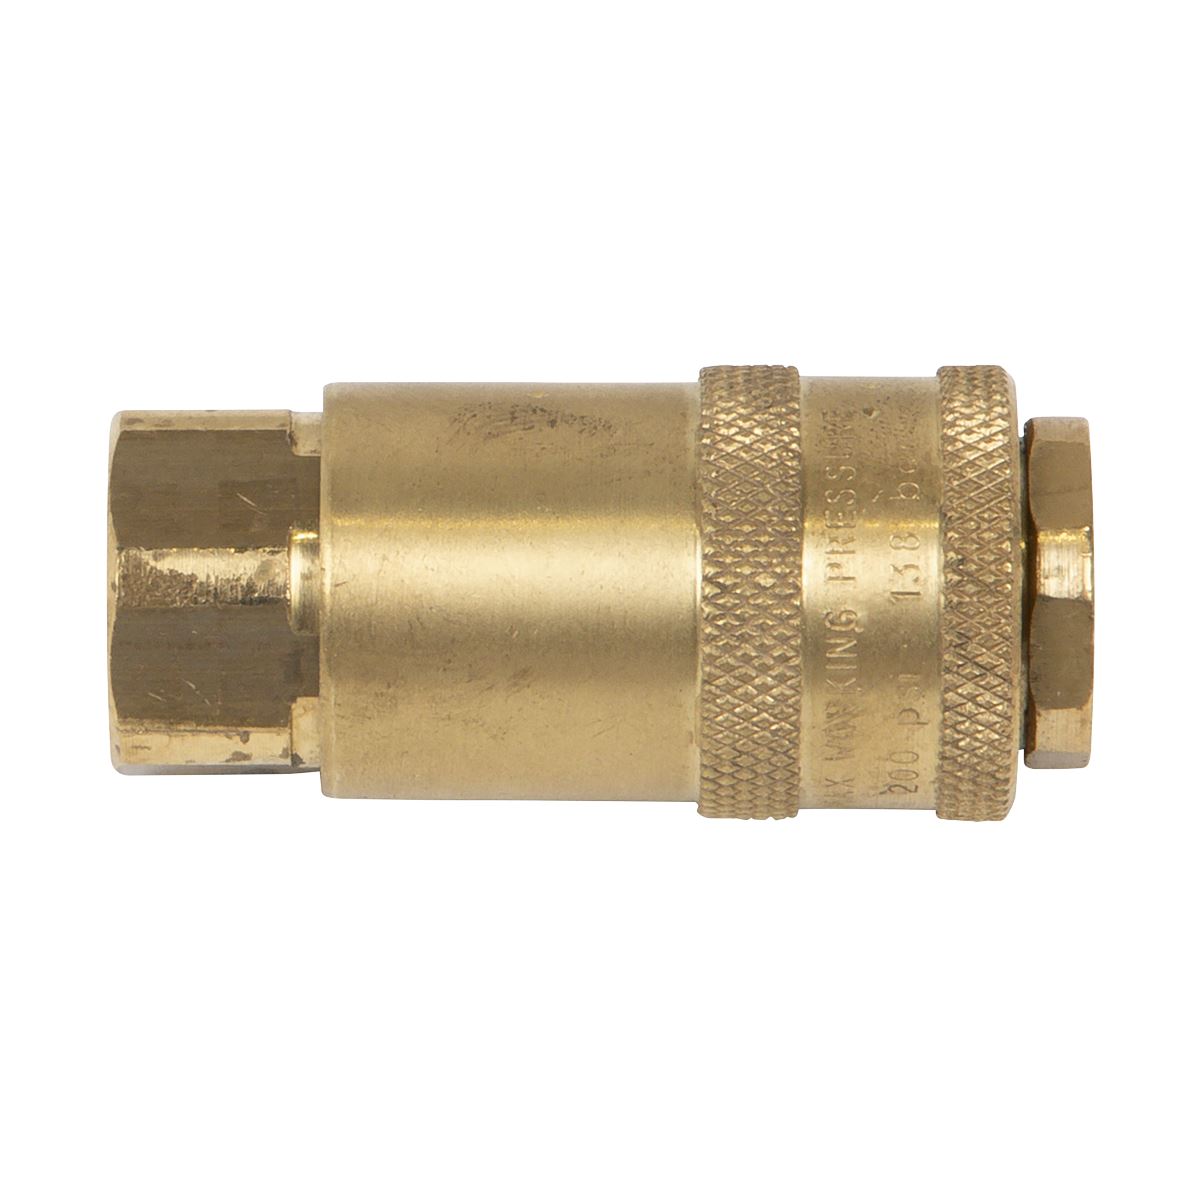 PCL Non-Corrodible PCL Coupling Body Female 1/4"BSP